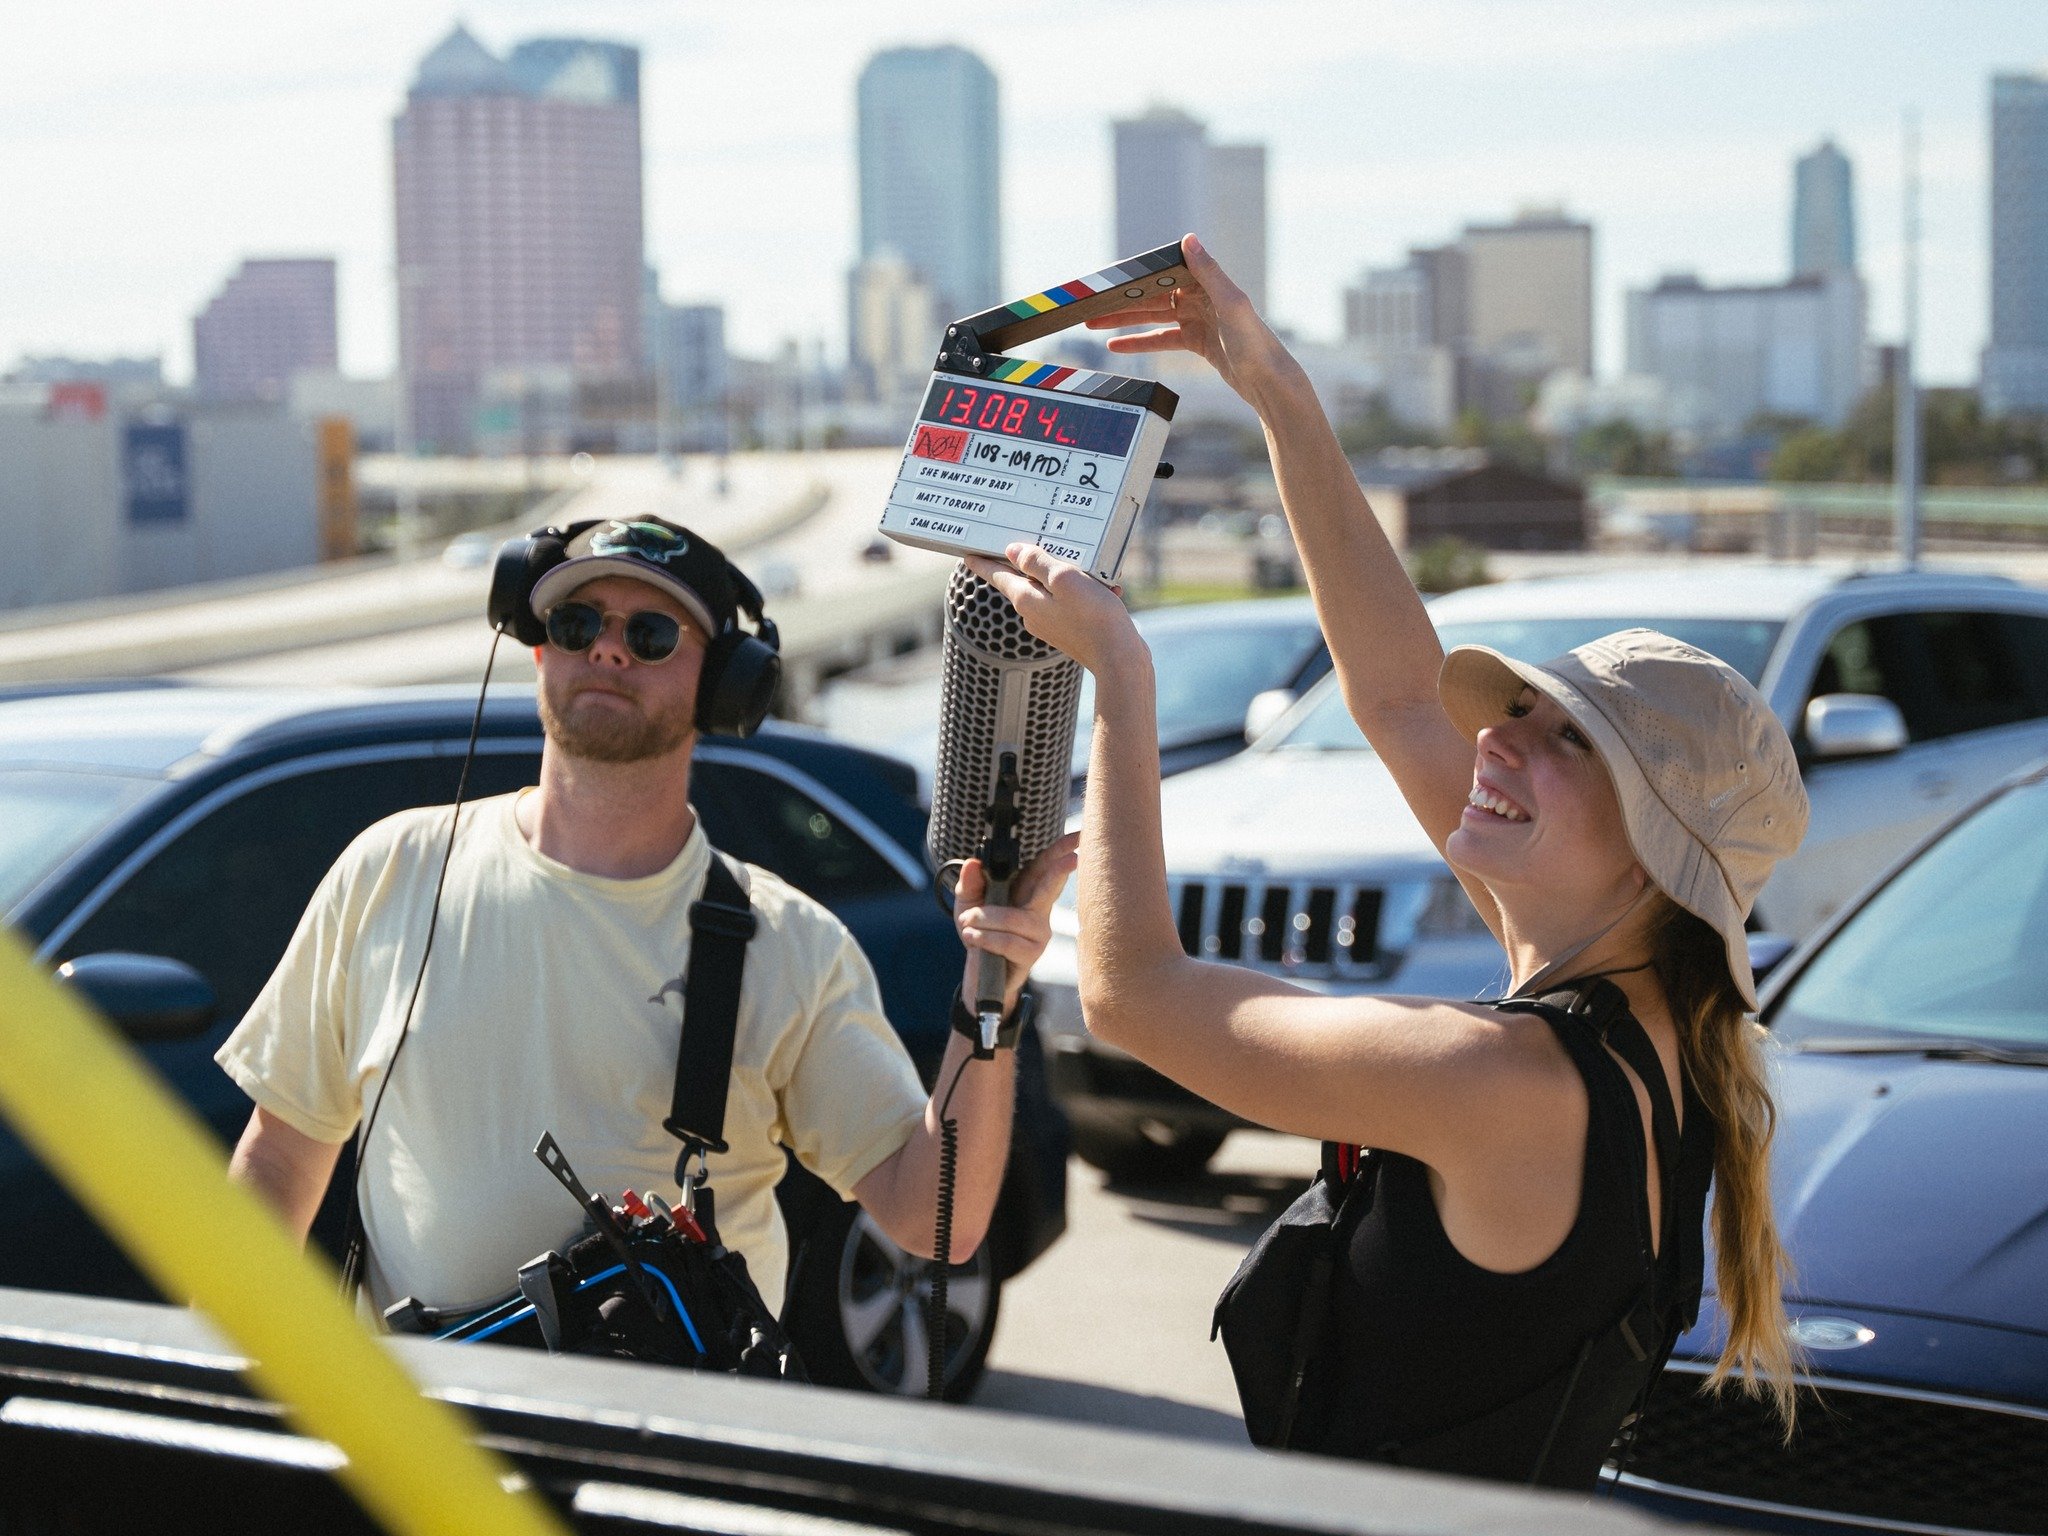 Behind the scenes of &quot;She Wants My Baby,&quot; an all-new film shot in Tampa Bay!

Starring Katerina Eichenberger, Shailene Garnett &amp; Jonathan Stoddard, this film follows a new mother who begins to suspect that her nanny is scheming to steal